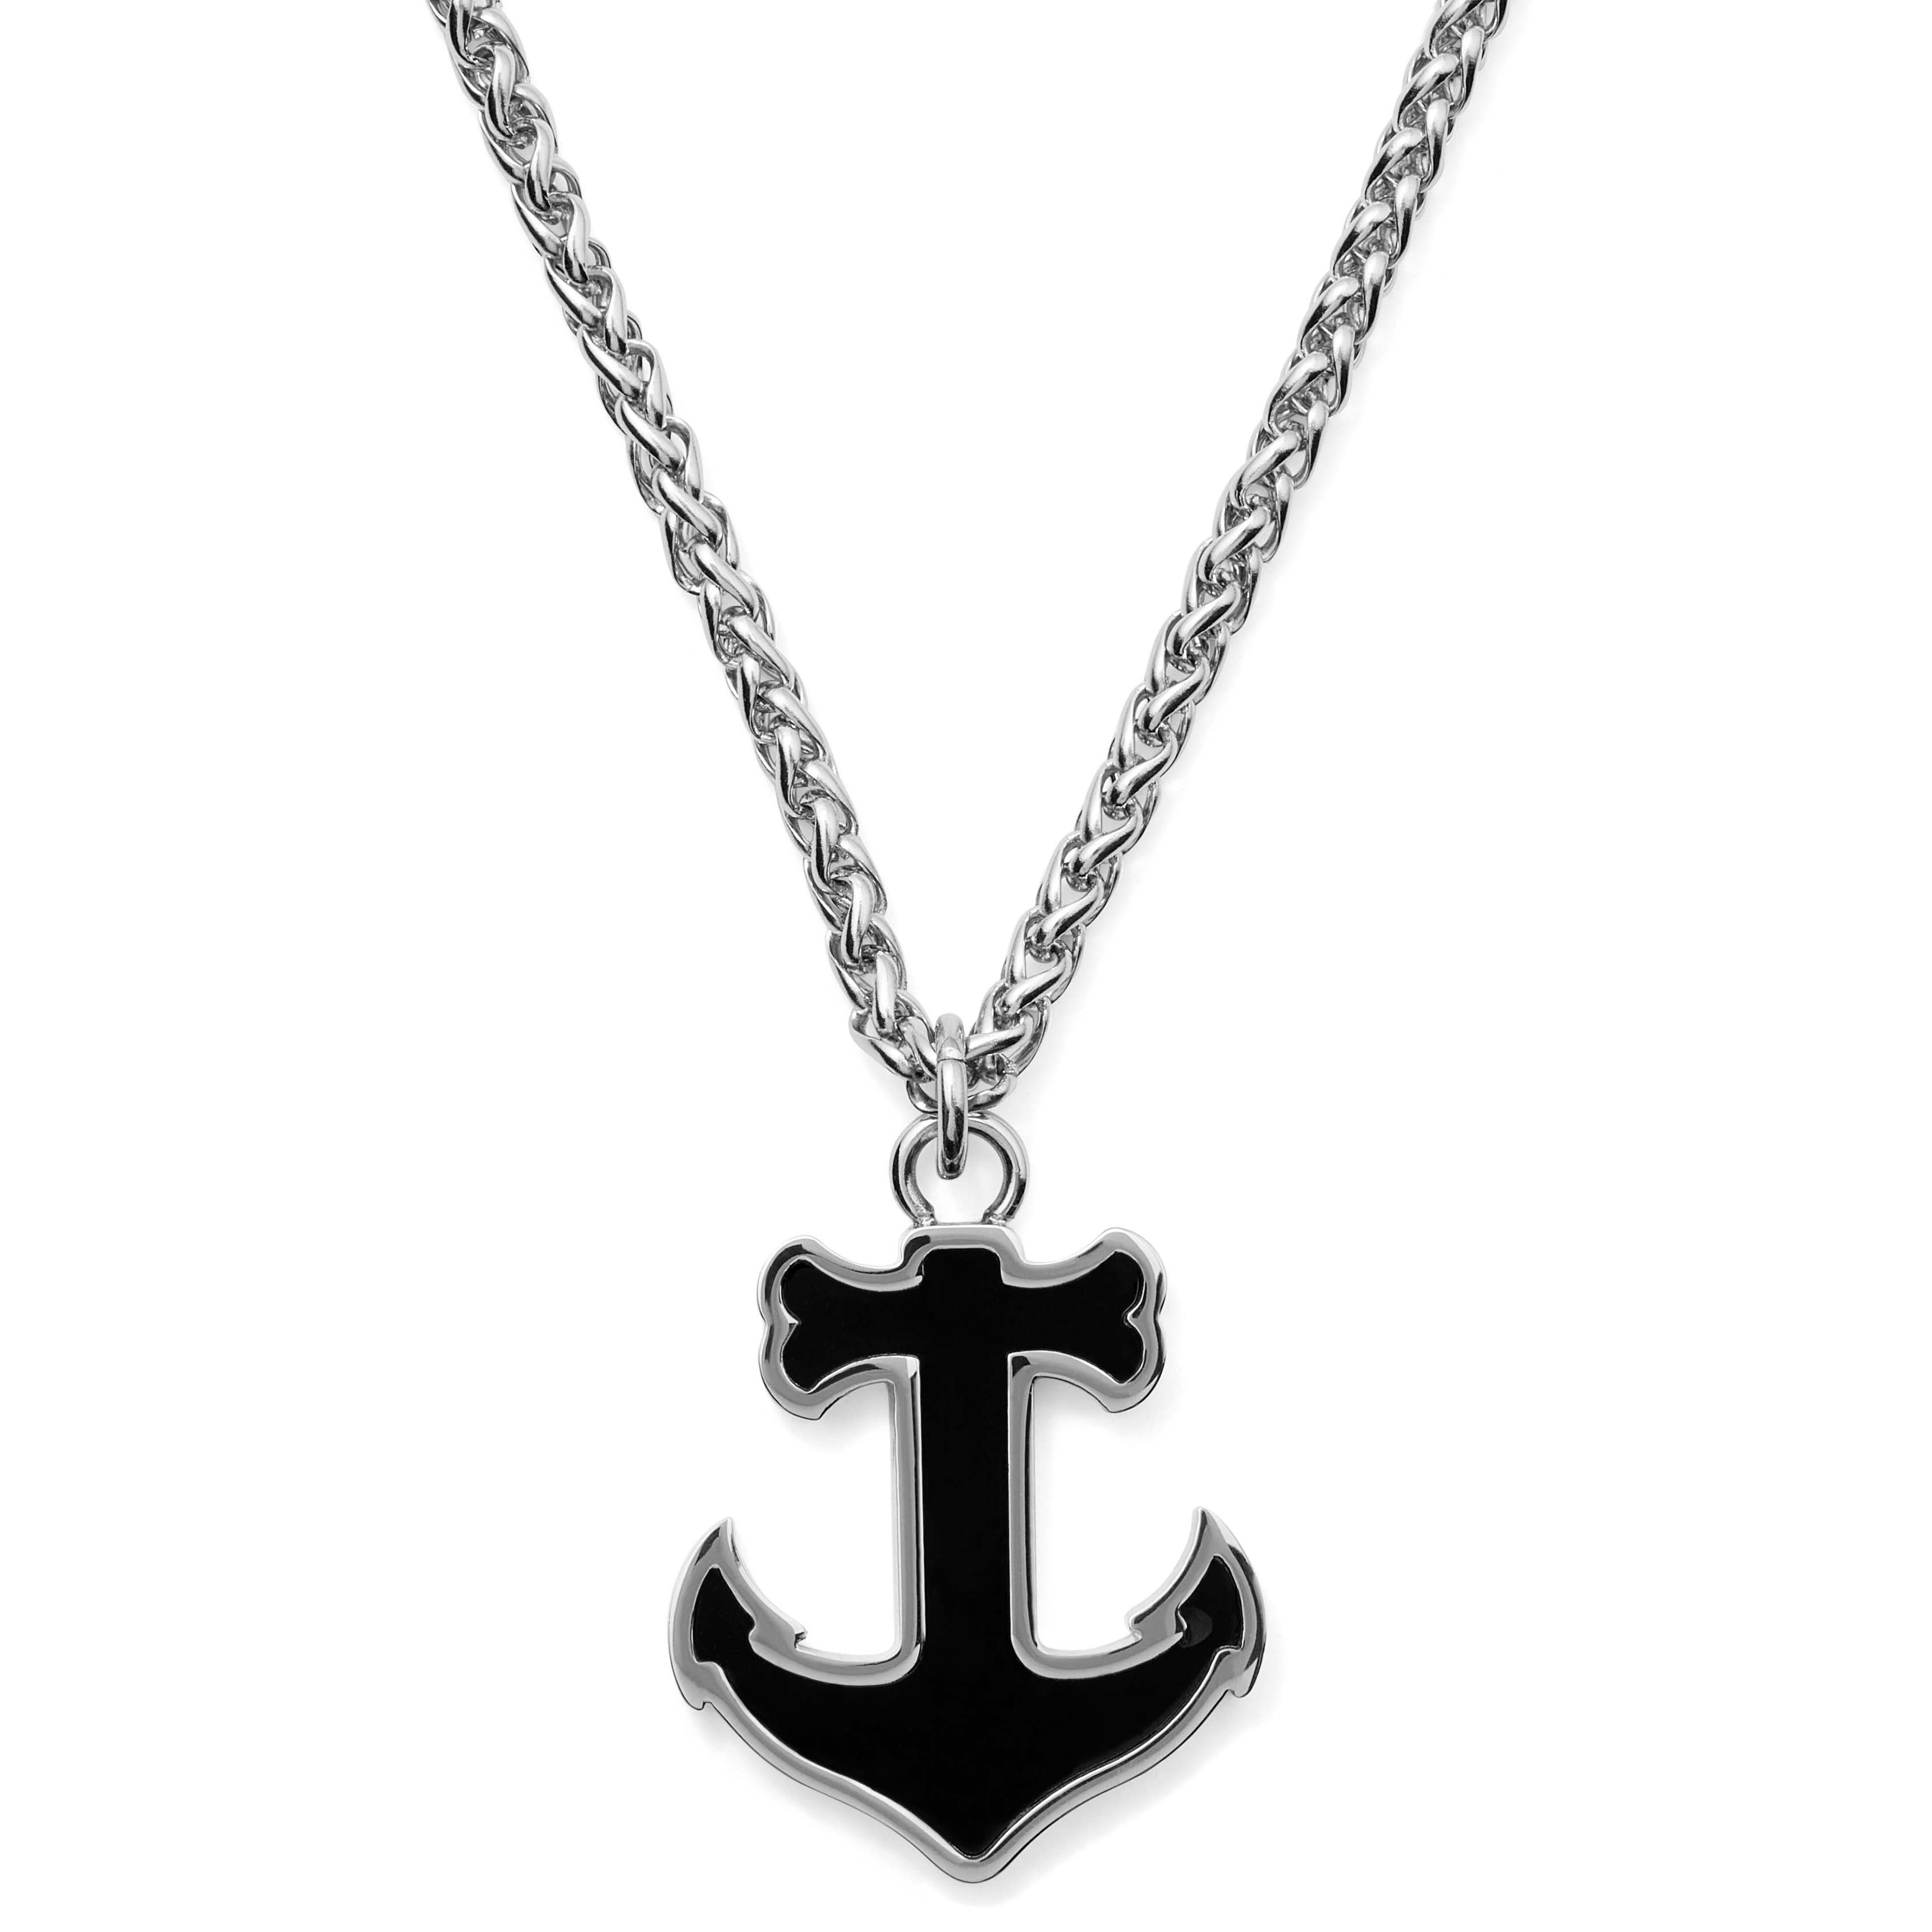 Tadd Steel & Onyx Anchor Necklace